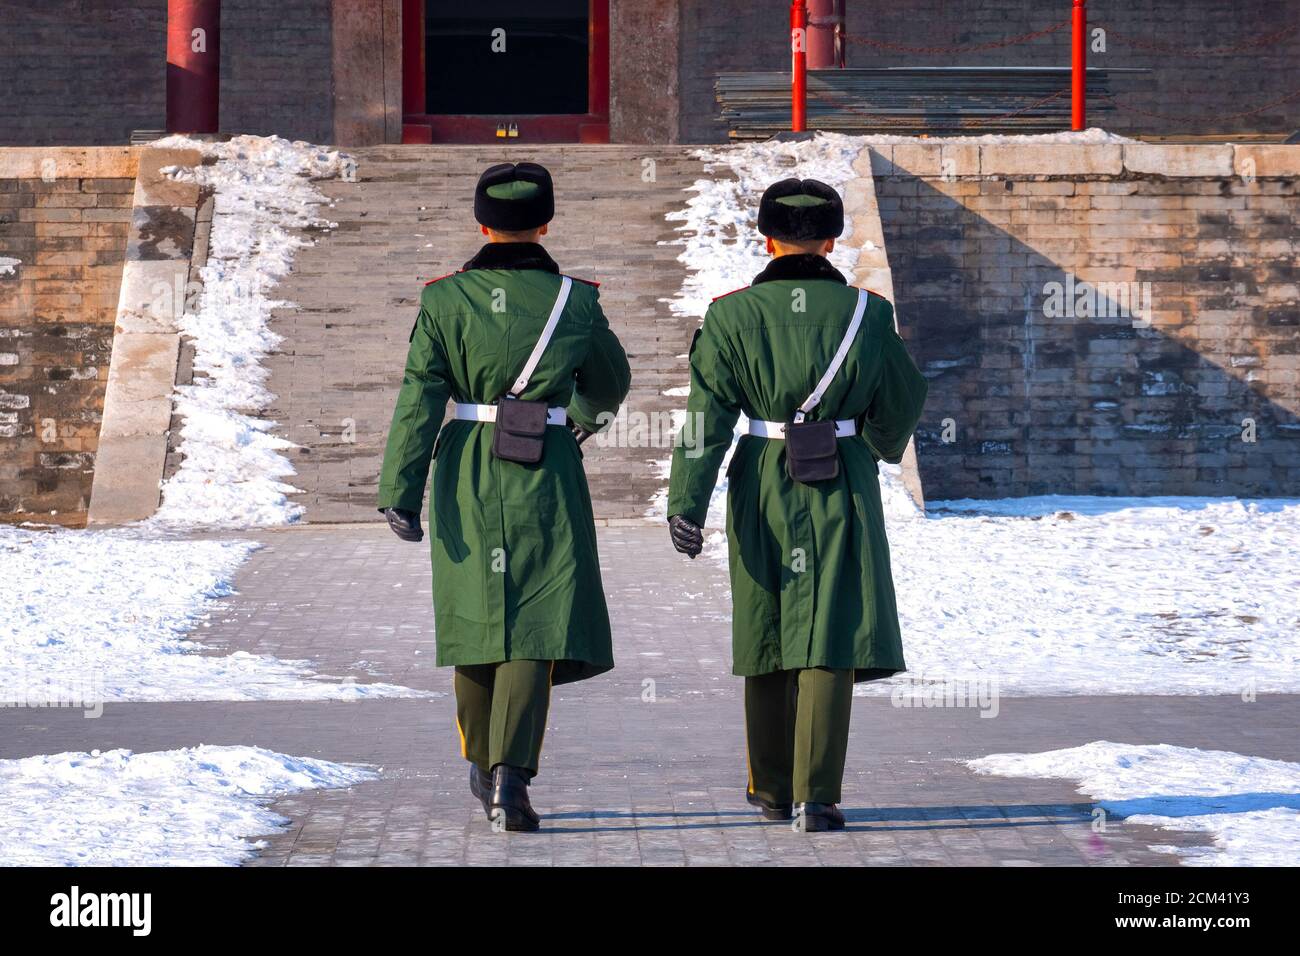 Beijing, China - Jan 9 2020: Unidentified Chinese military officer march through courtyard in front of the Taihedian (Hall of Supreme Harmony) at the Stock Photo